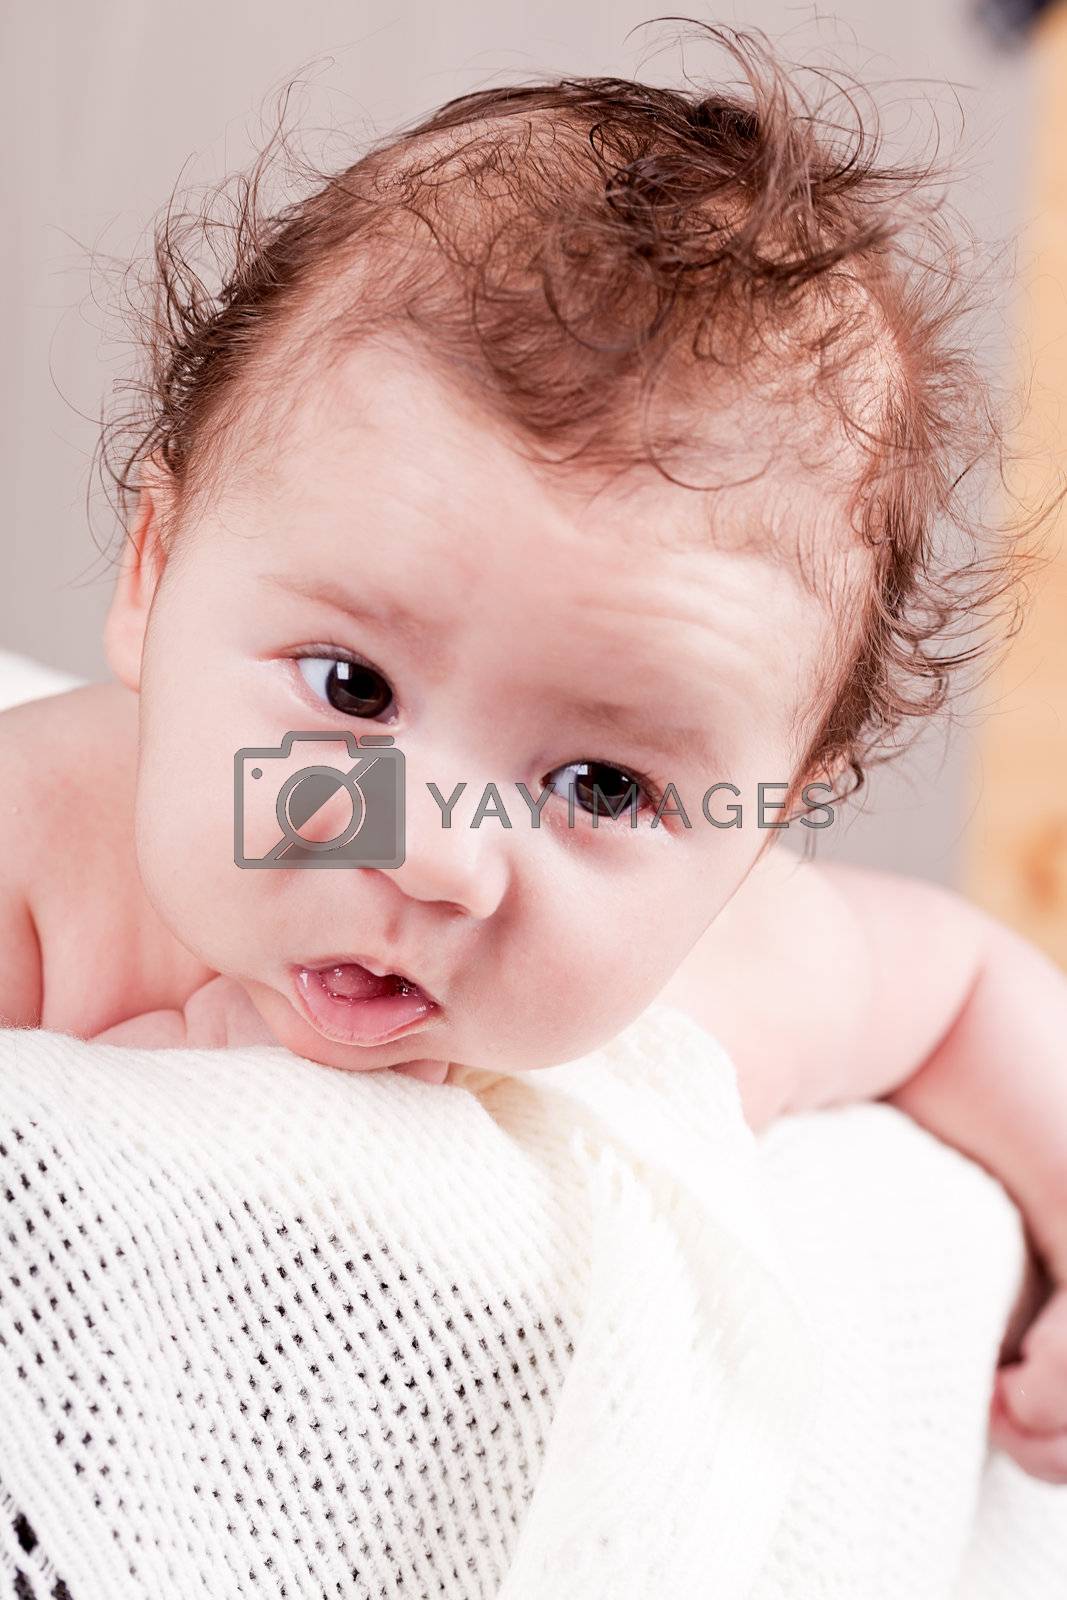 Royalty free image of sweet little baby infant toddler on blanket in basket by juniart